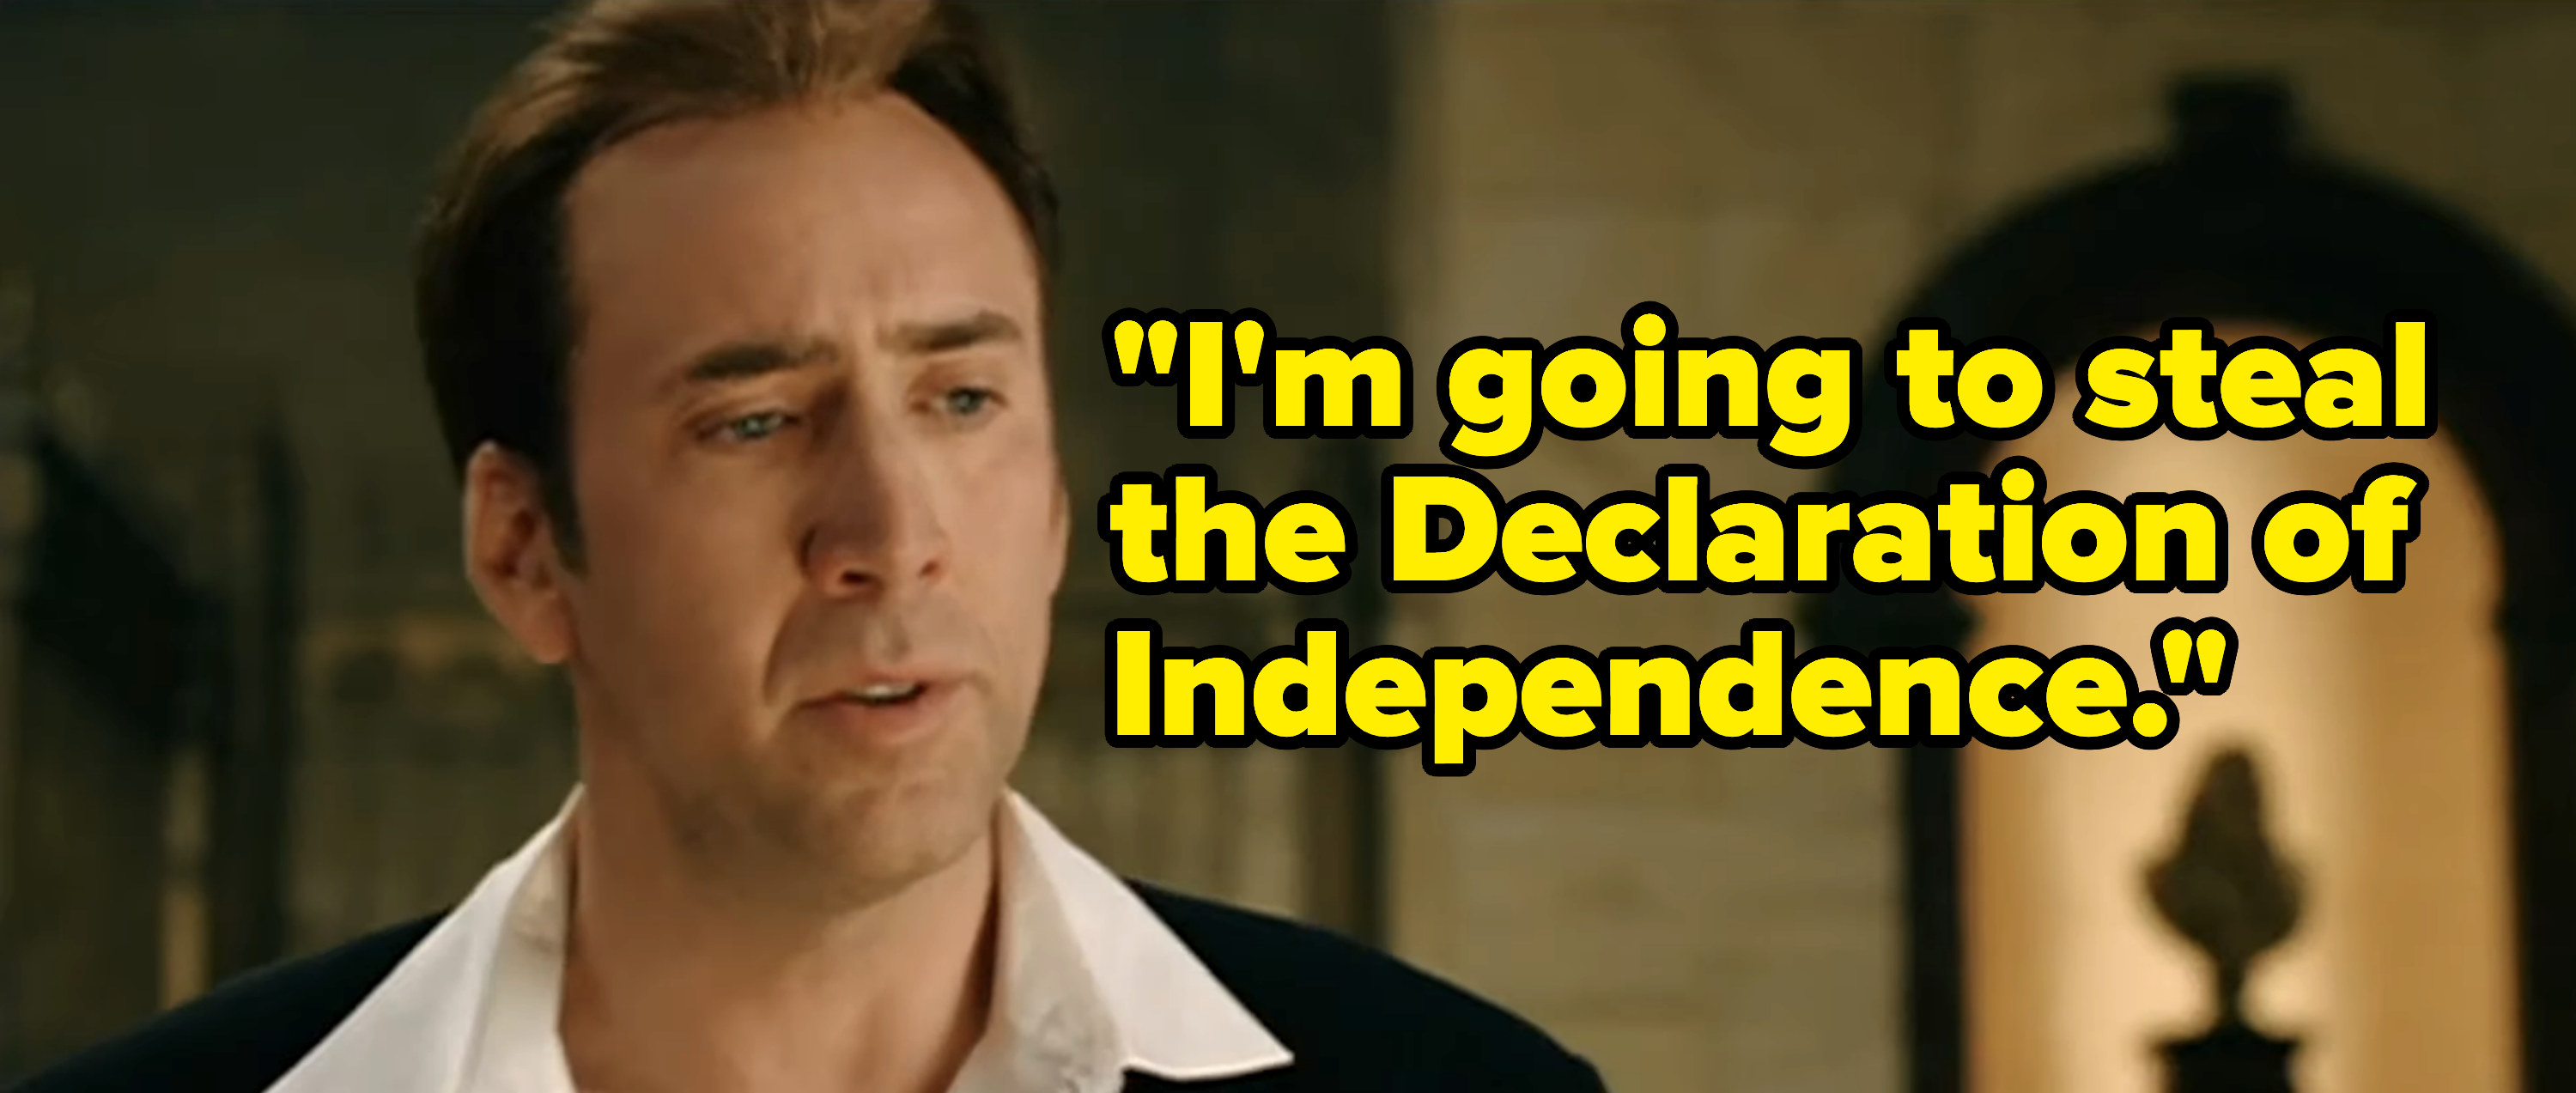 Nic Cage&#x27;s character saying, &quot;I&#x27;m going to steal the Declaration of Independence.&quot;